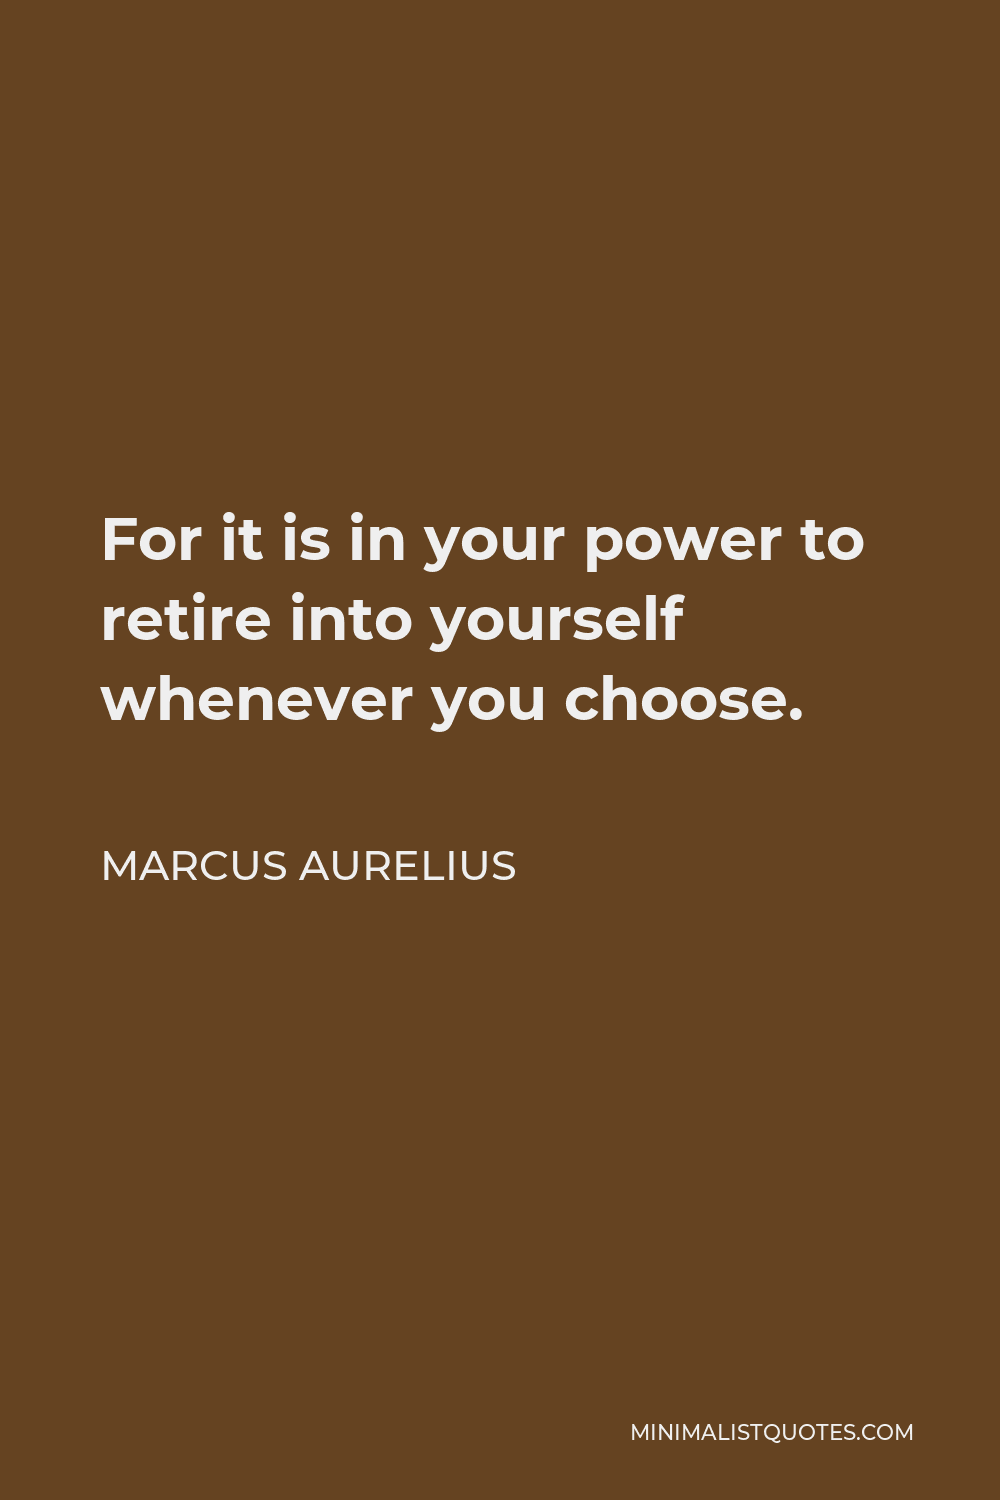 Marcus Aurelius Quote - For it is in your power to retire into yourself whenever you choose.